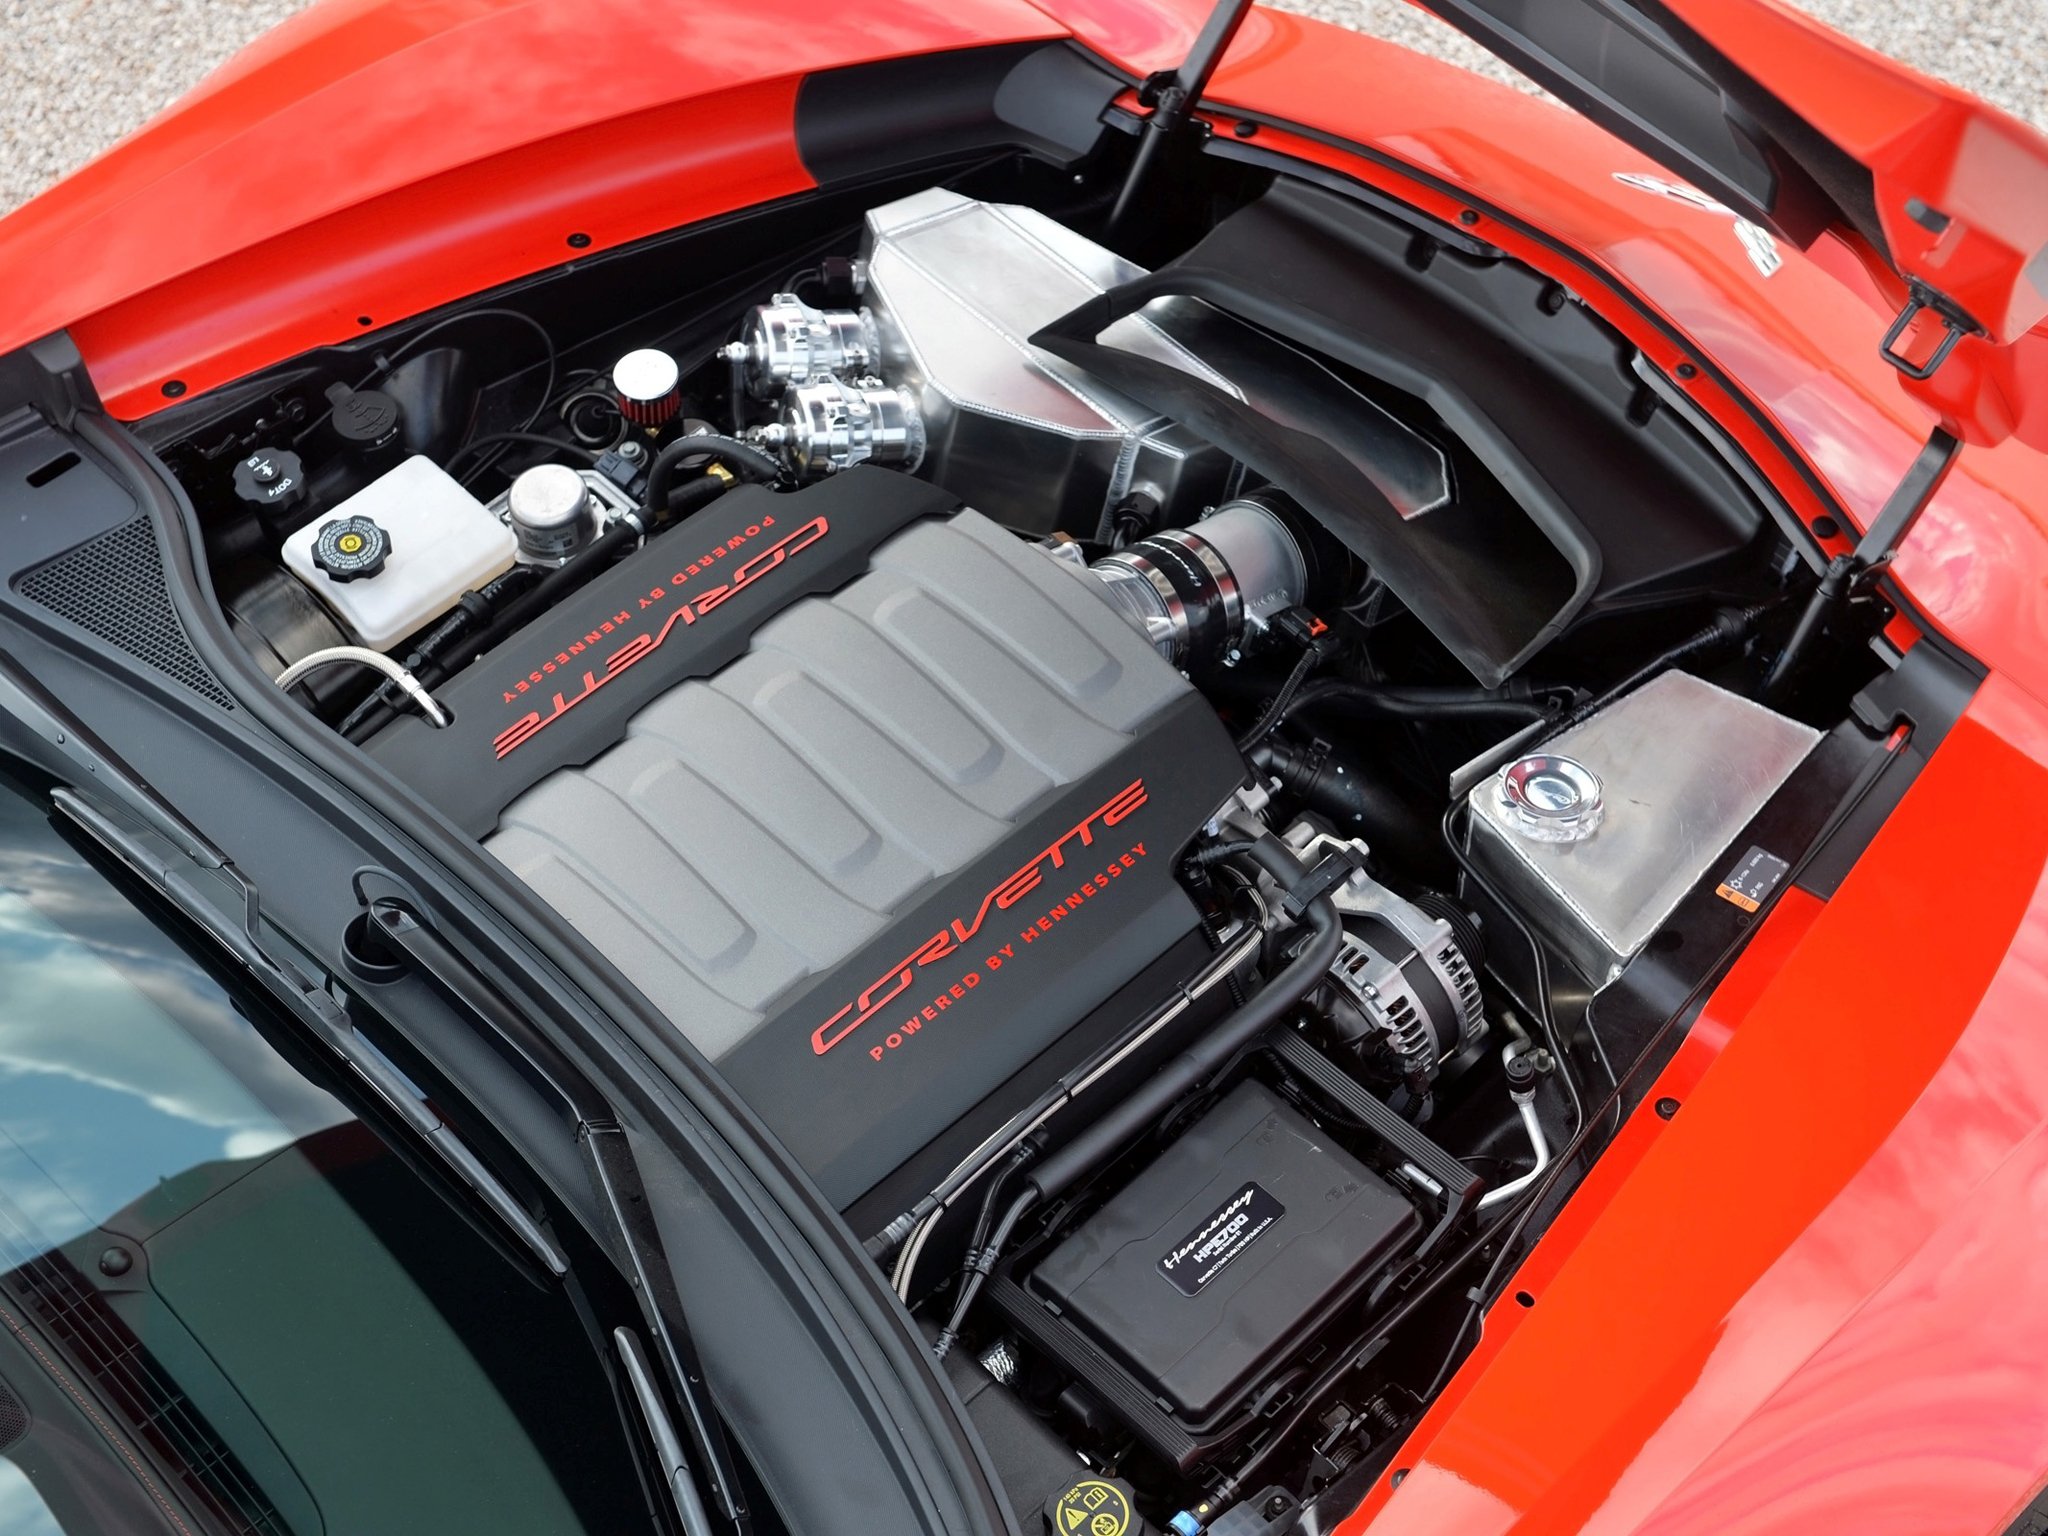 2014, Hennessey, Chevrolet, Corvette, Stingray, Hpe700, Twin, Turbo, C 7, Supercar, Muscle, Sting, Ray, Engine Wallpaper